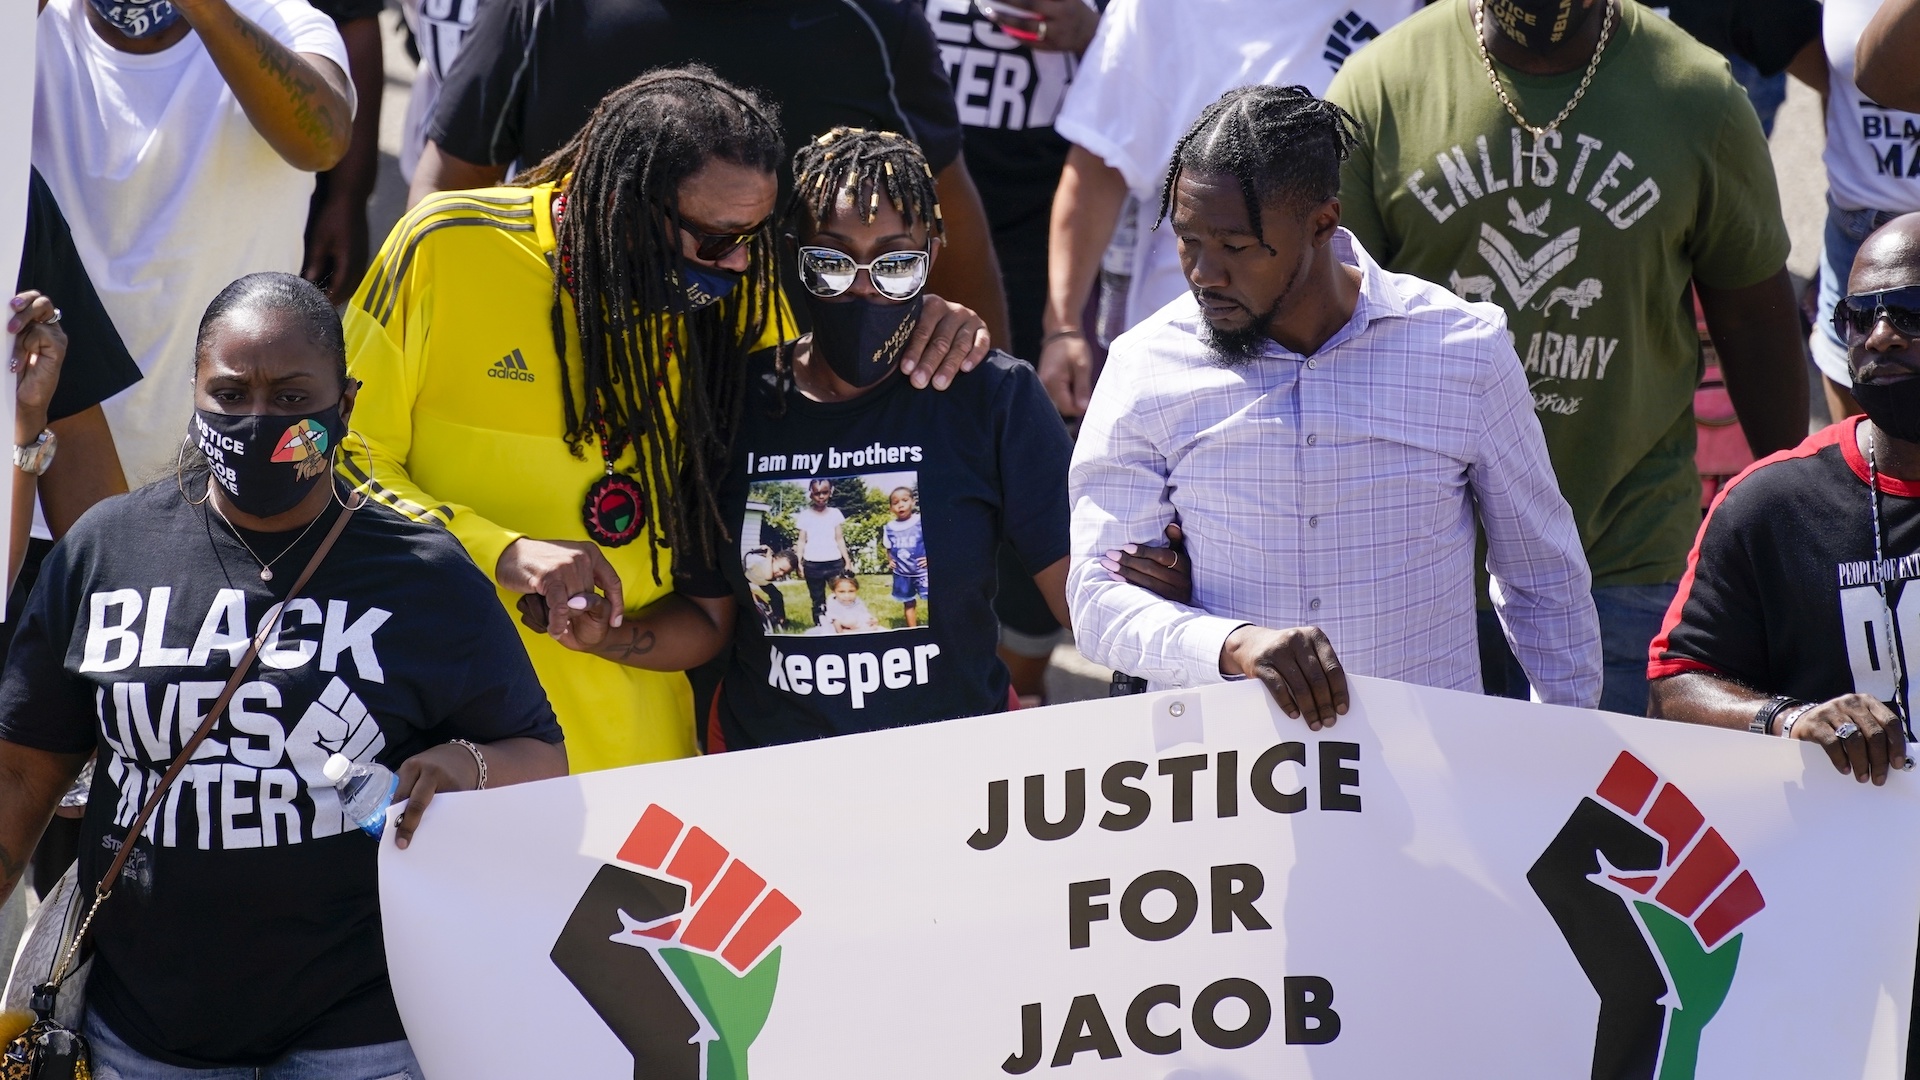 In this Aug. 29, 2020, file photo, Jacob Blake's sister Letetra Widman, center, and uncle Justin Blake, left, march at a rally for Jacob Blake Saturday, Aug. 29, 2020, in Kenosha, Wis. (AP Photo/Morry Gash, File)